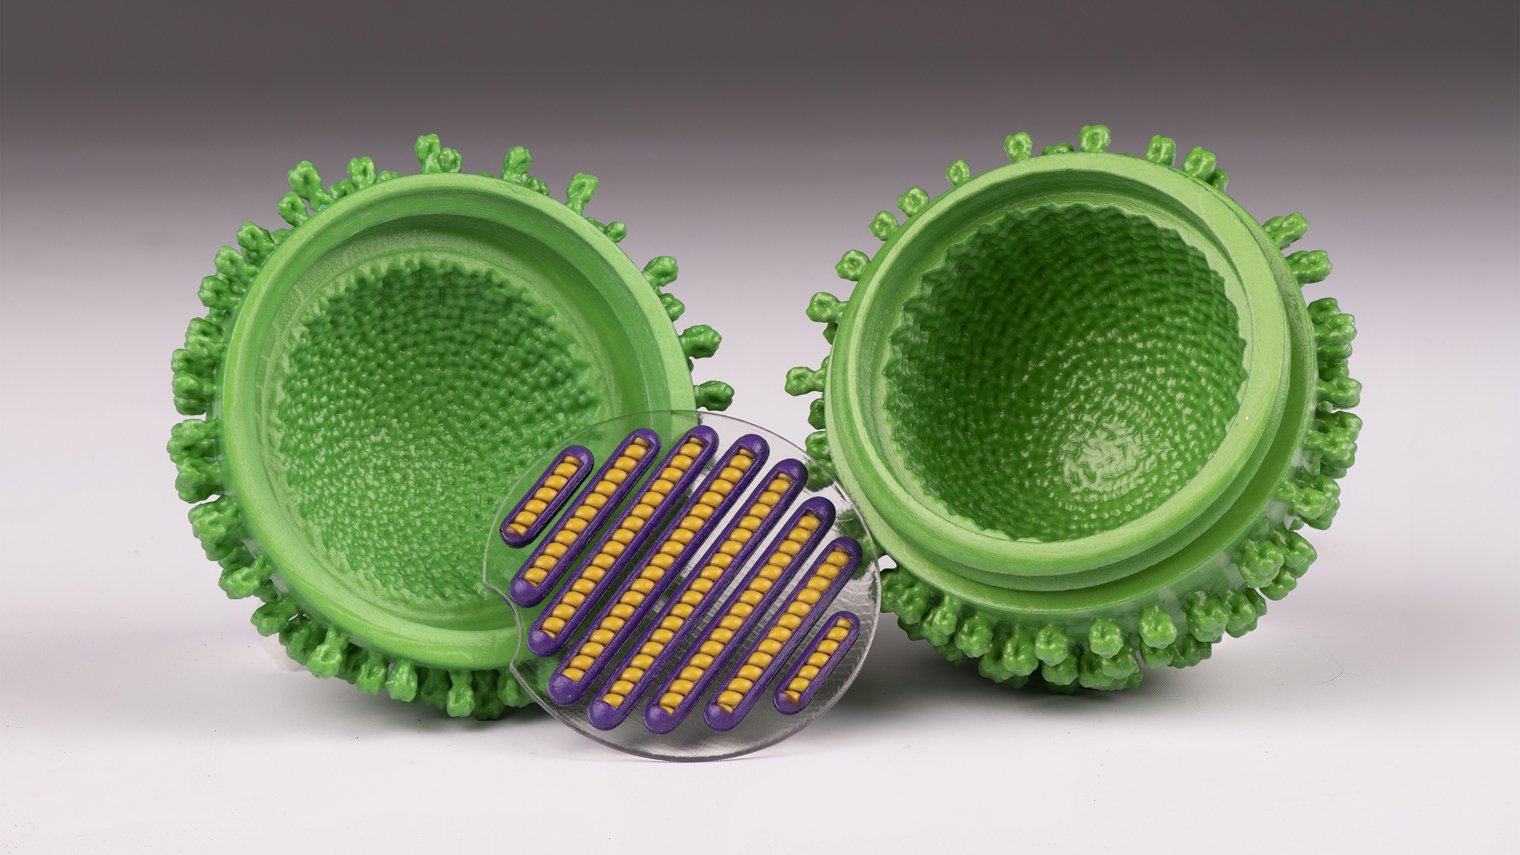 A 3D printed influenza virus model in an opened position. The clear disk that contains the eight purple capsids and the eight yellow RNA strands has been removed from the green envelope. Photo via Mimaki USA.